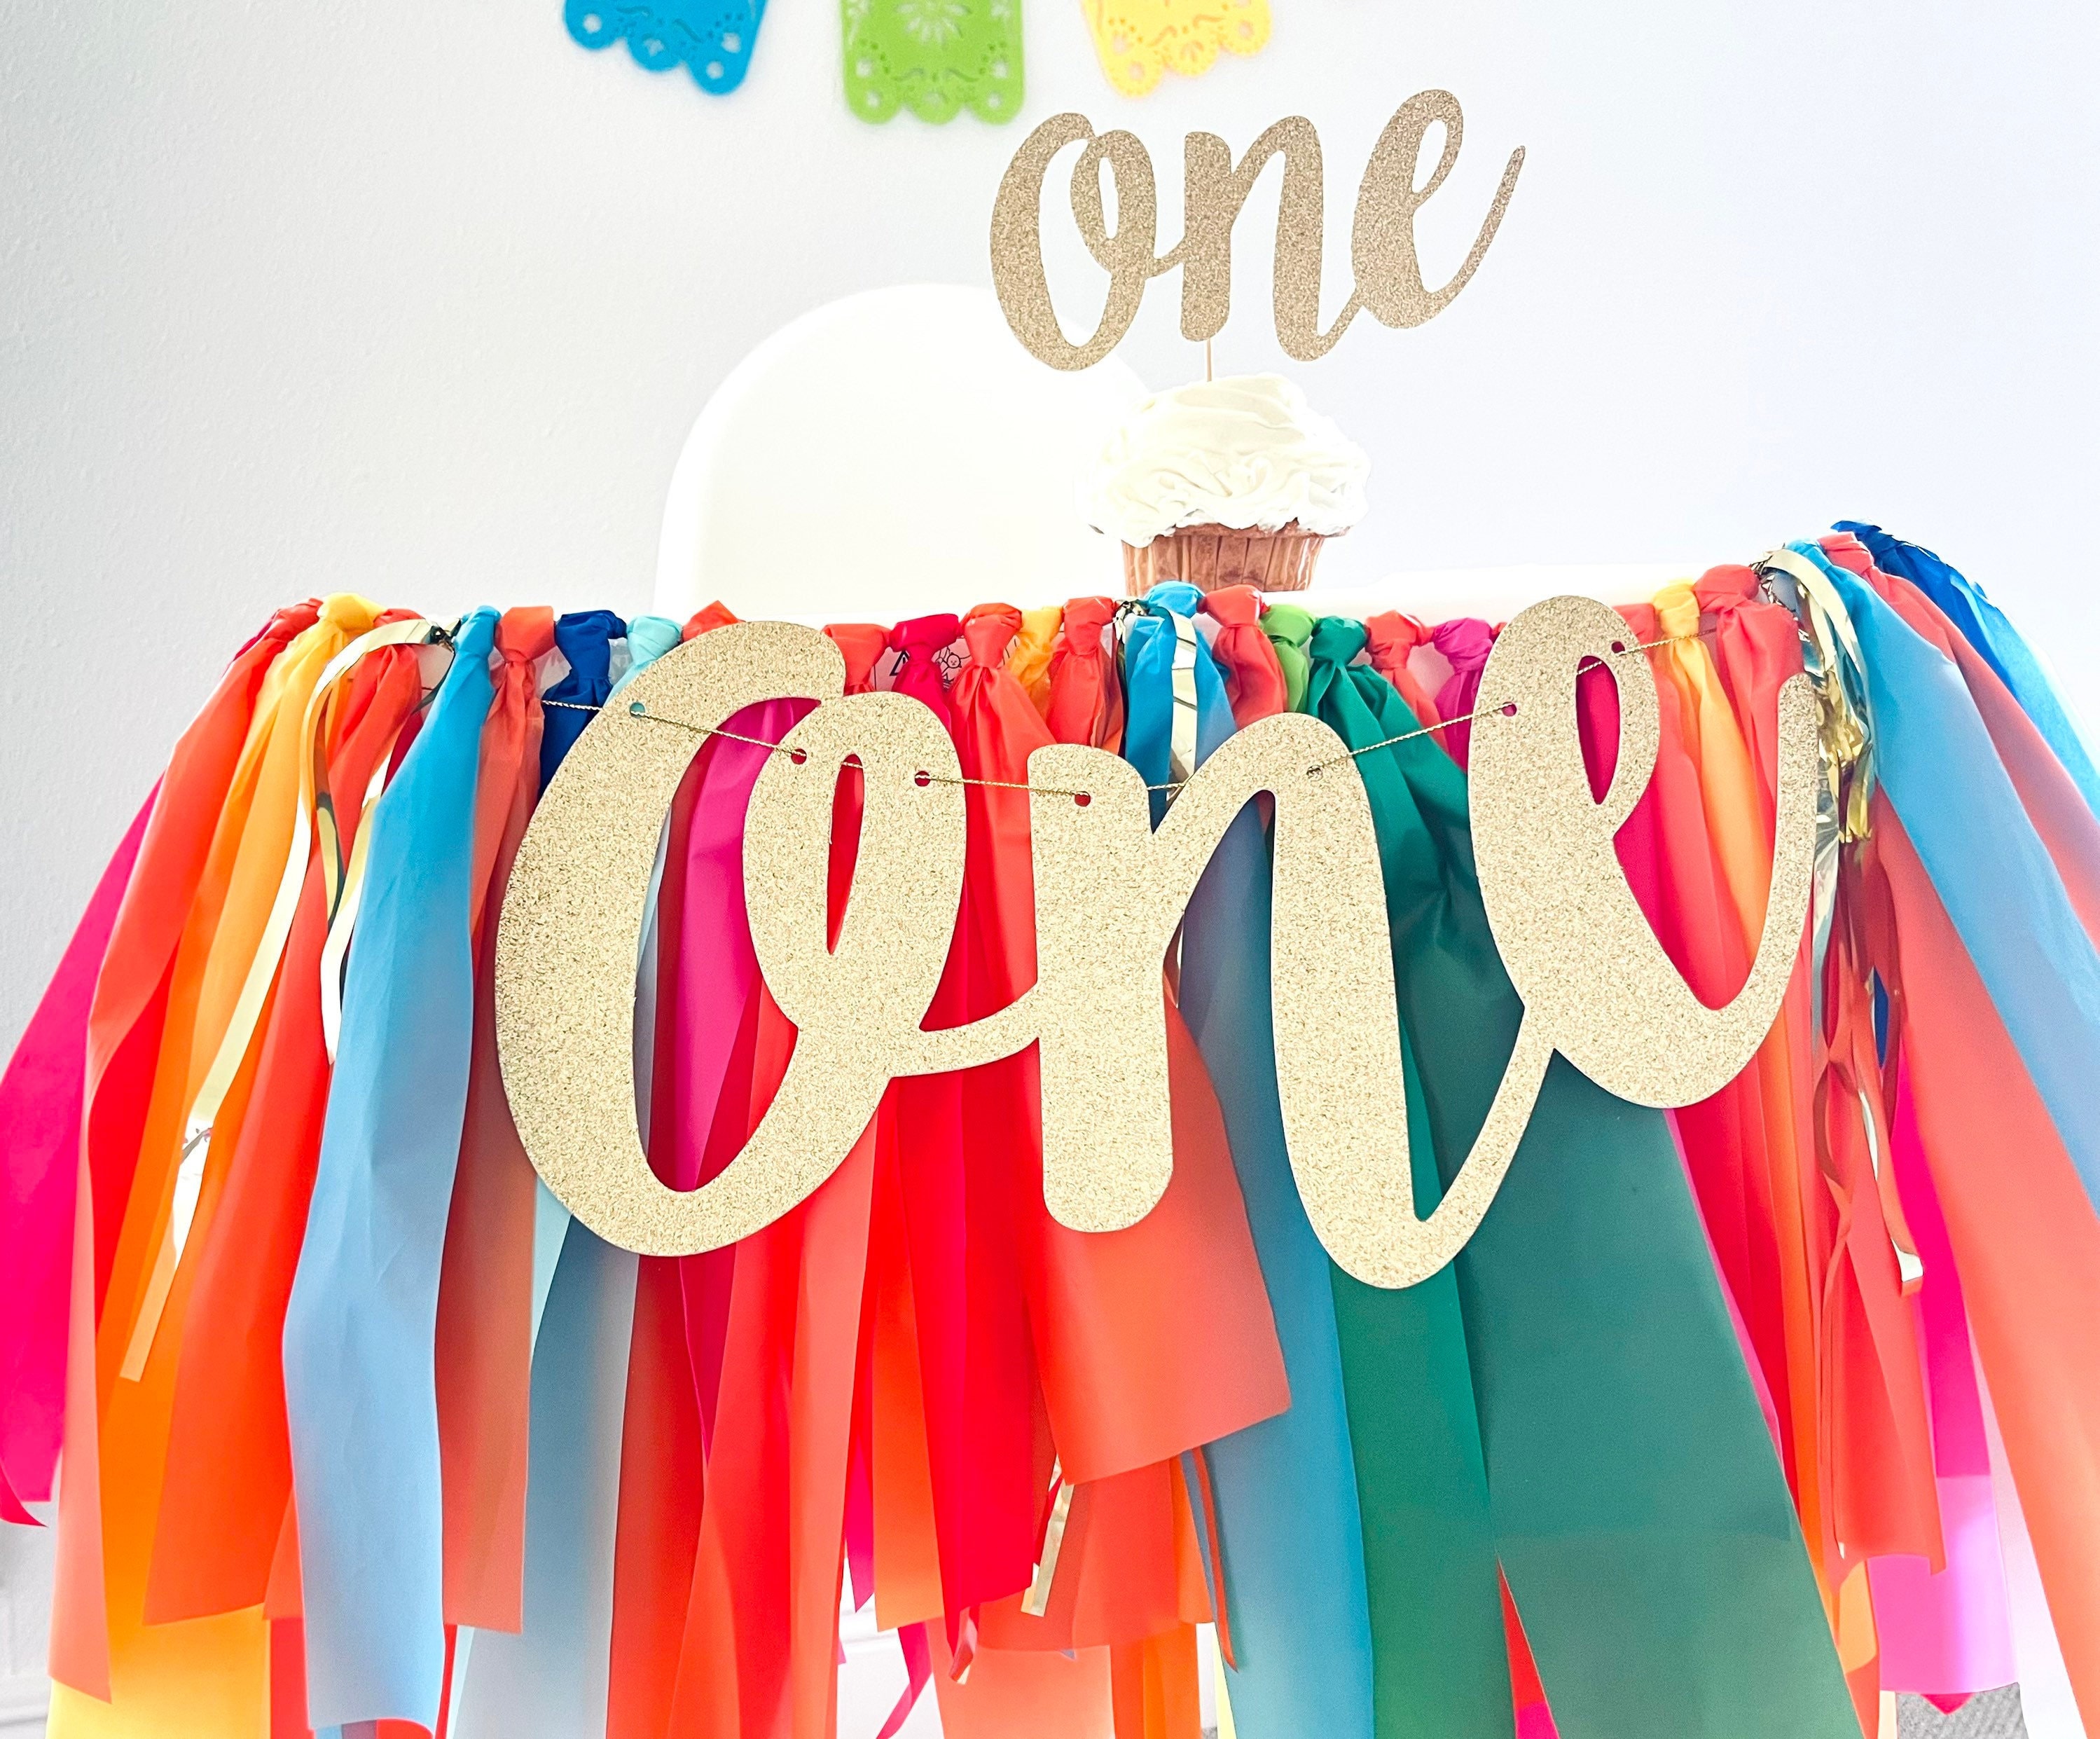 Blue/green Ruffled Crepe Paper Streamers Party Decorations 